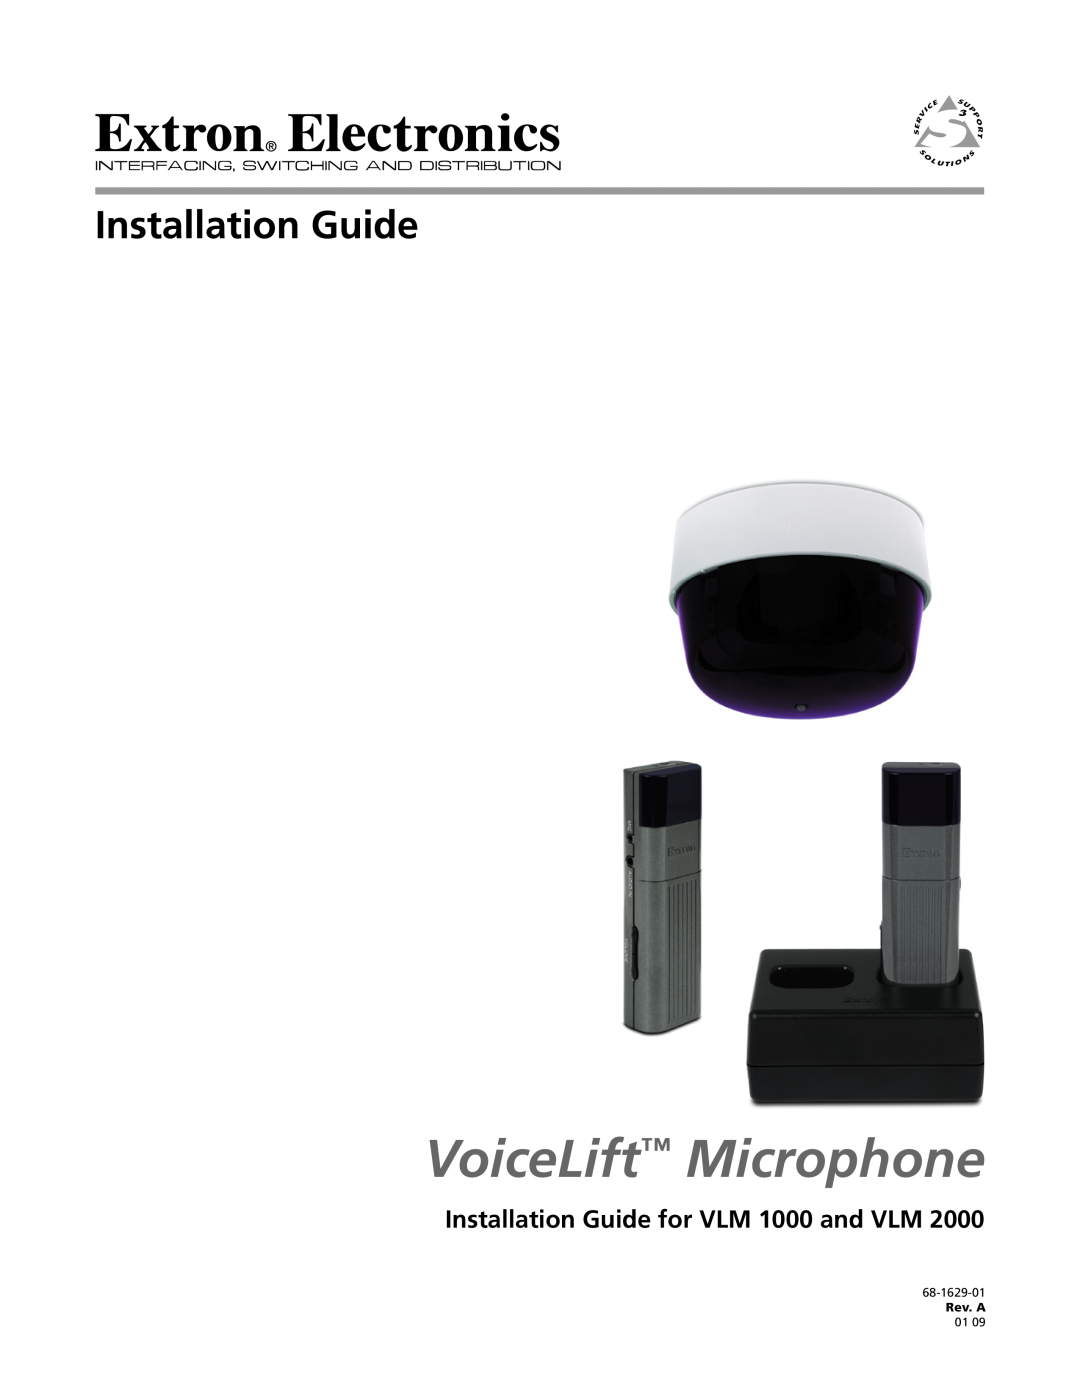 Extron electronic VLM 2000 manual Installation Guide for VLM 1000 and VLM, VoiceLift Microphone, 68-1629-01 